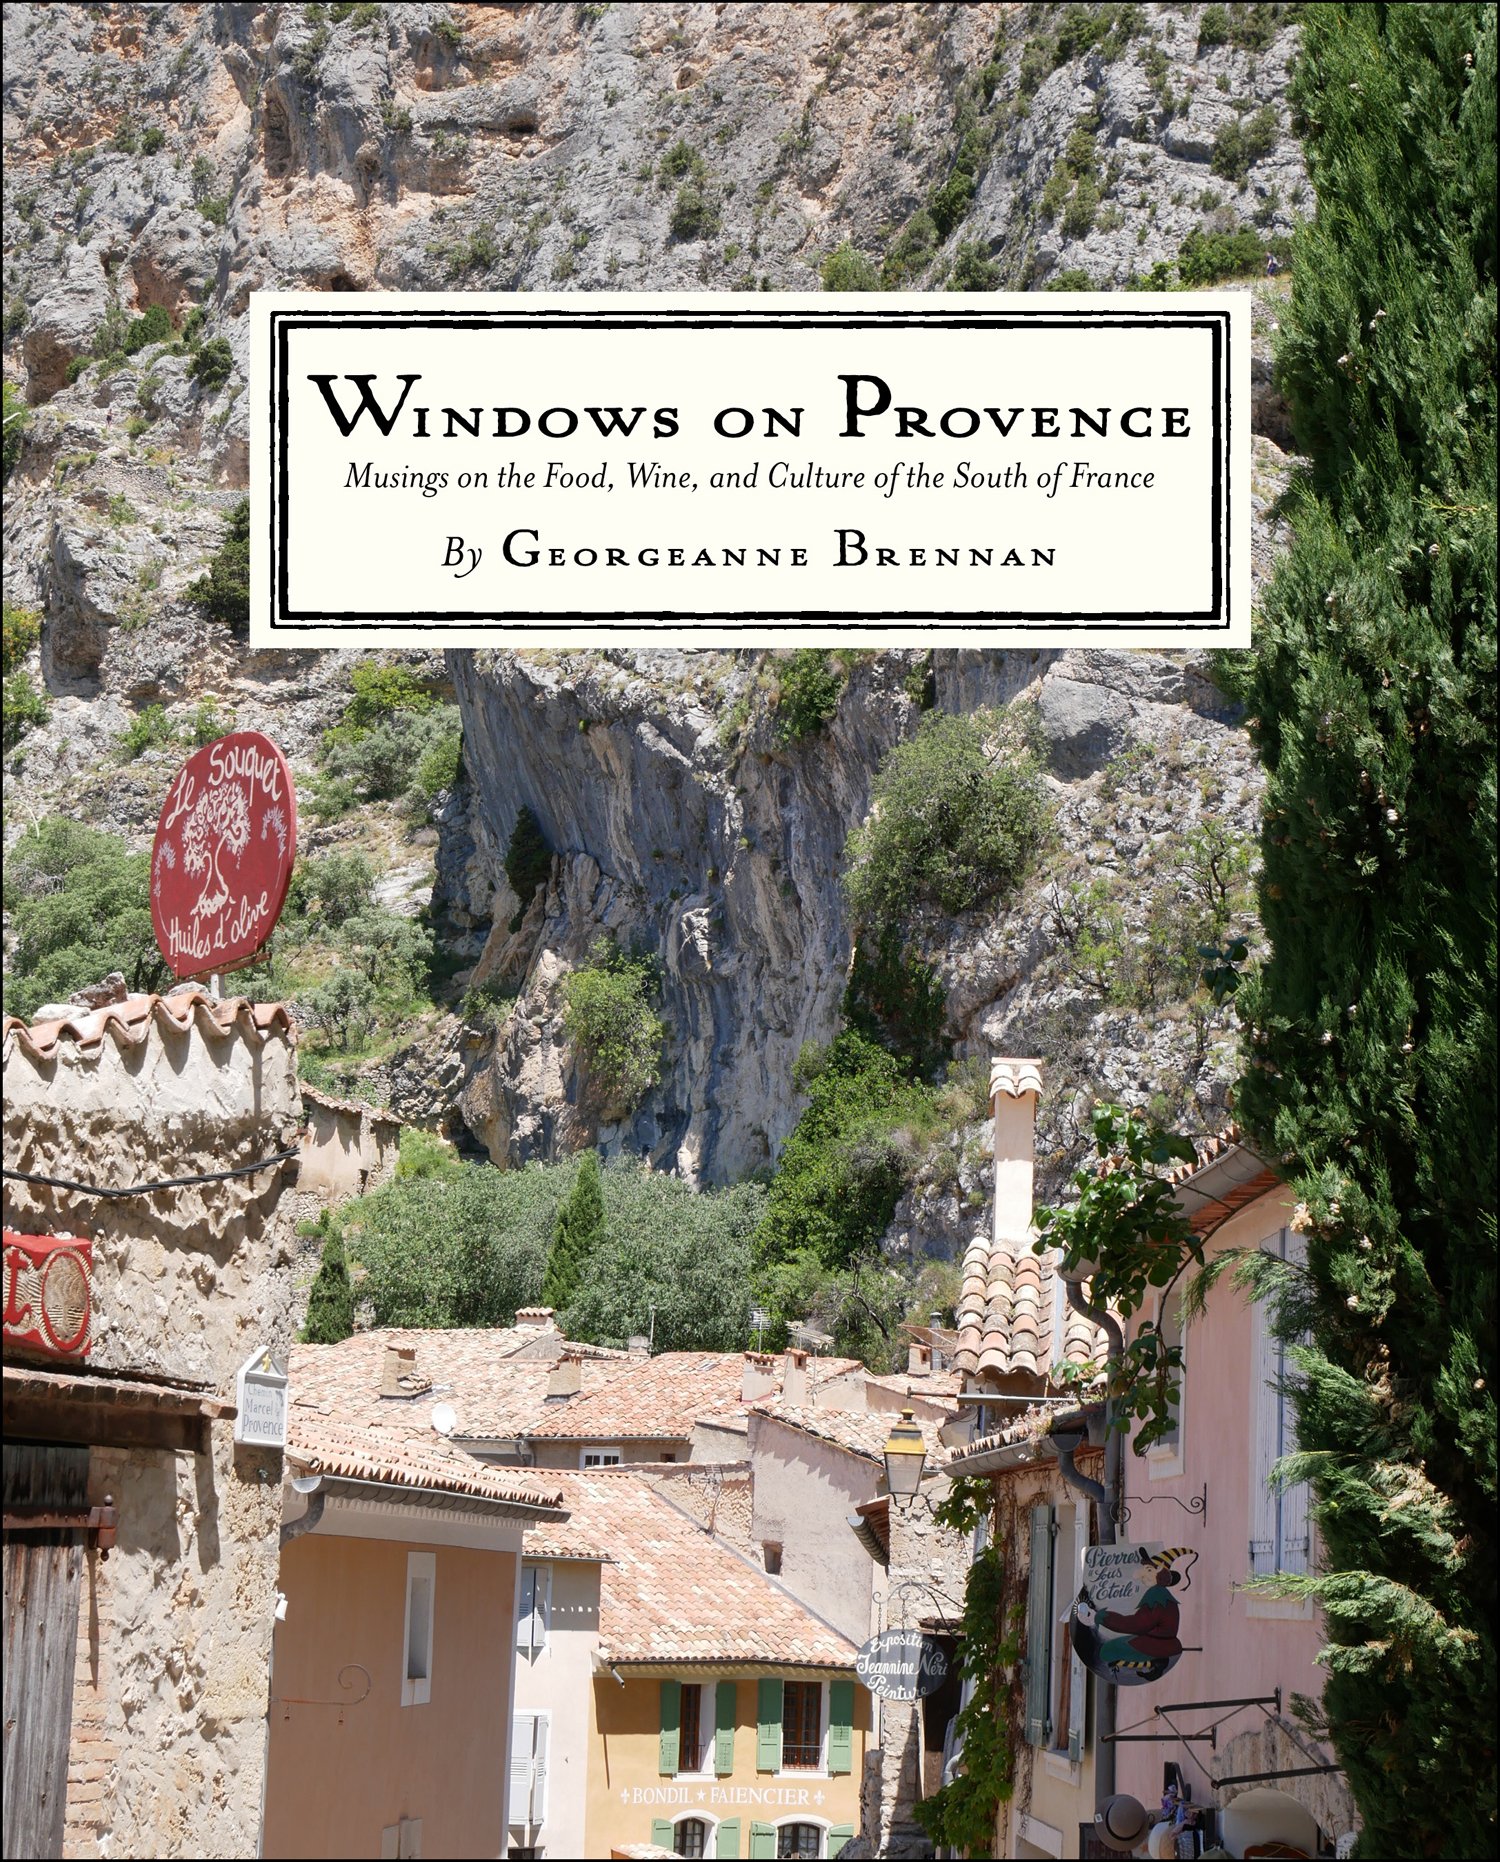 Windows on Provence: Musings on the Food, Wine, and Culture of the South of France